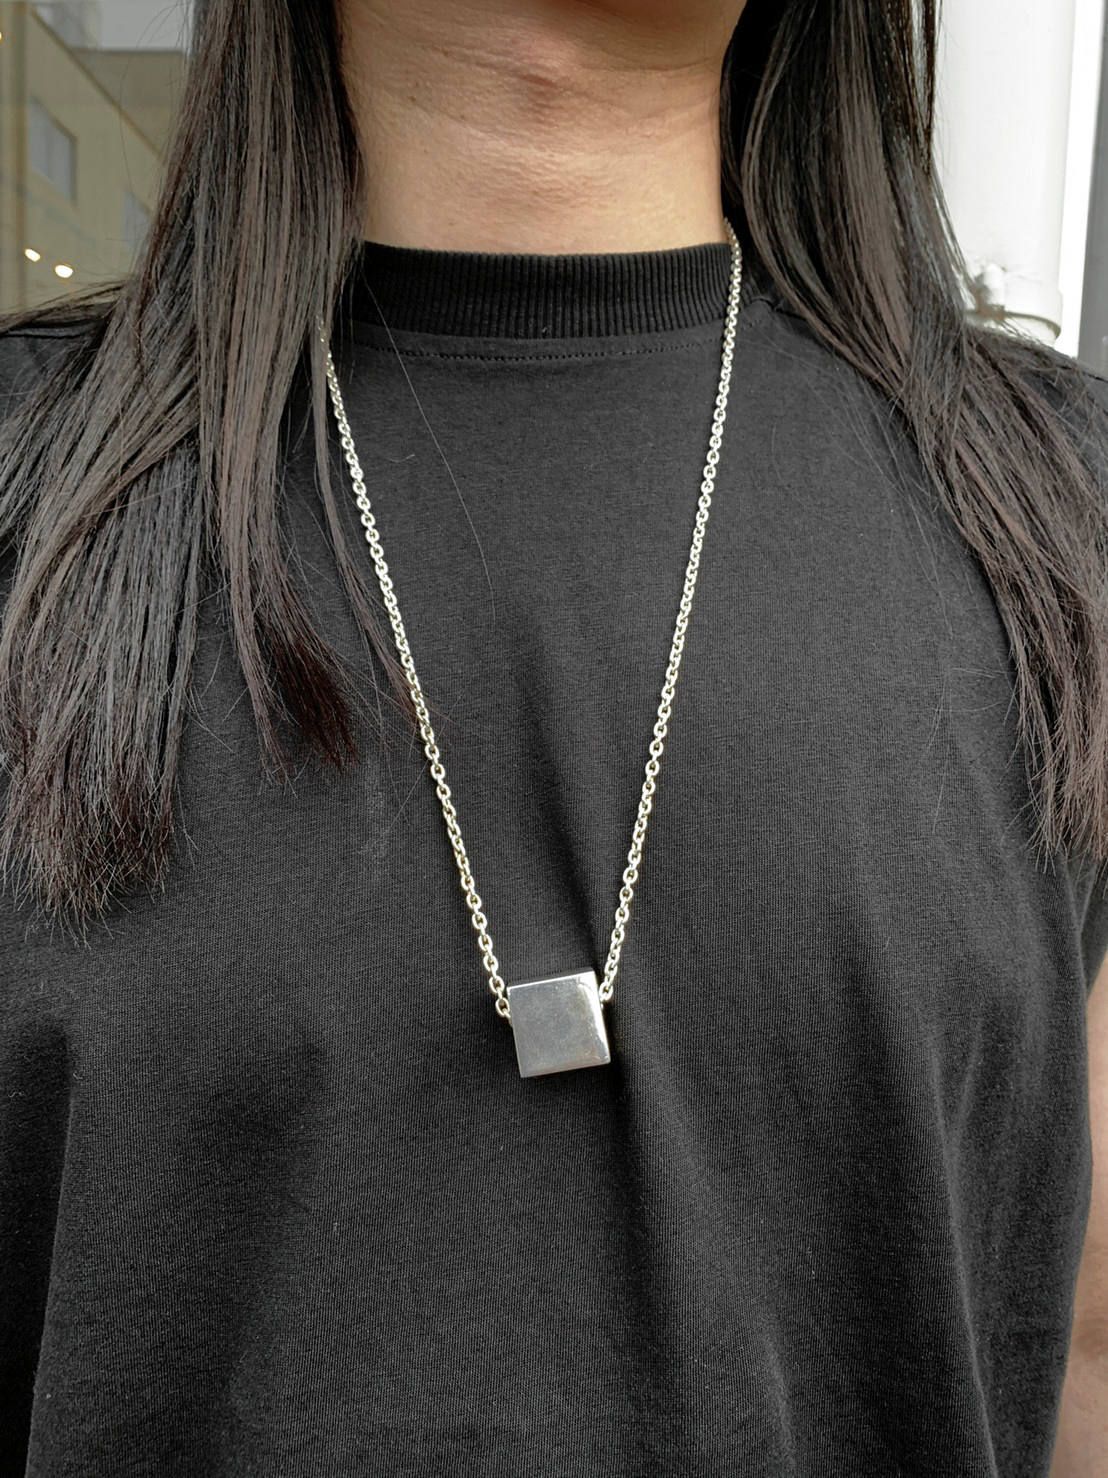 Parts of Four - キューブネックレス CUBE NECKLACE SILVER | STORY